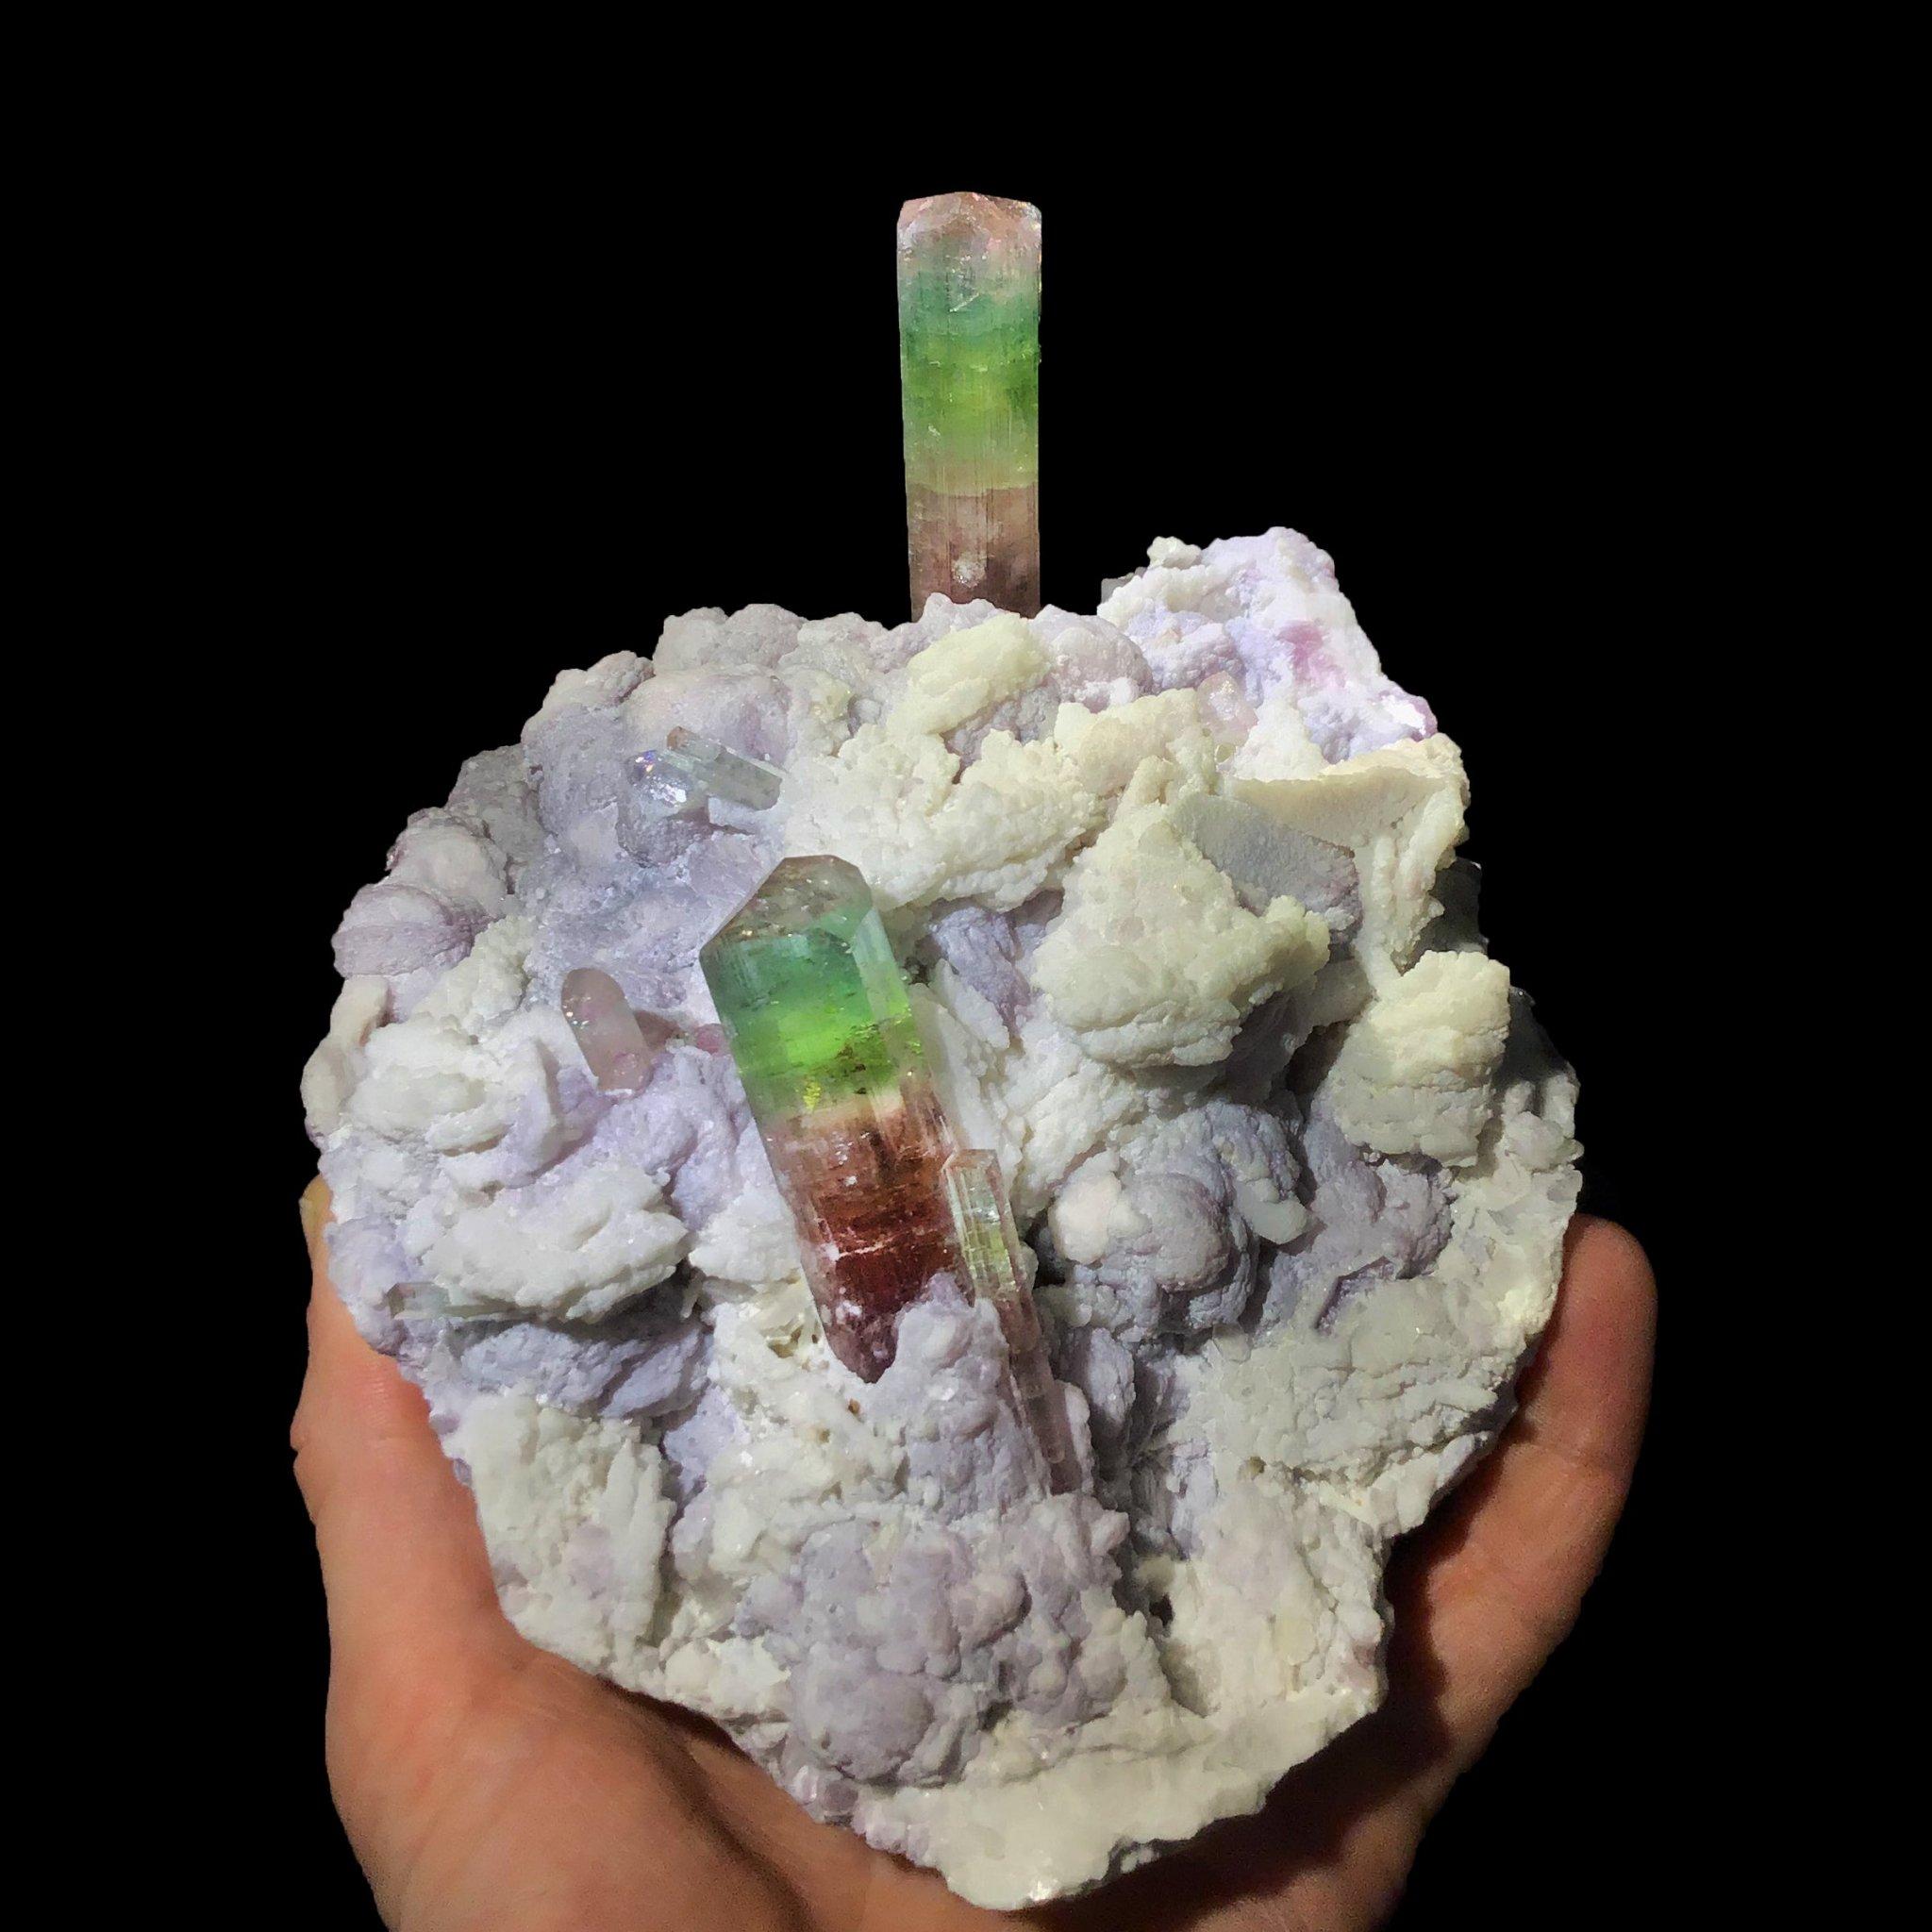 Paprok Nuristan, Afghanistan

This stunning specimen features two large, fully terminated watermelon tourmaline crystals showcasing nearly the entire rainbow spectrum, set beautifully in a matrix of purple lepidolite and additional smaller